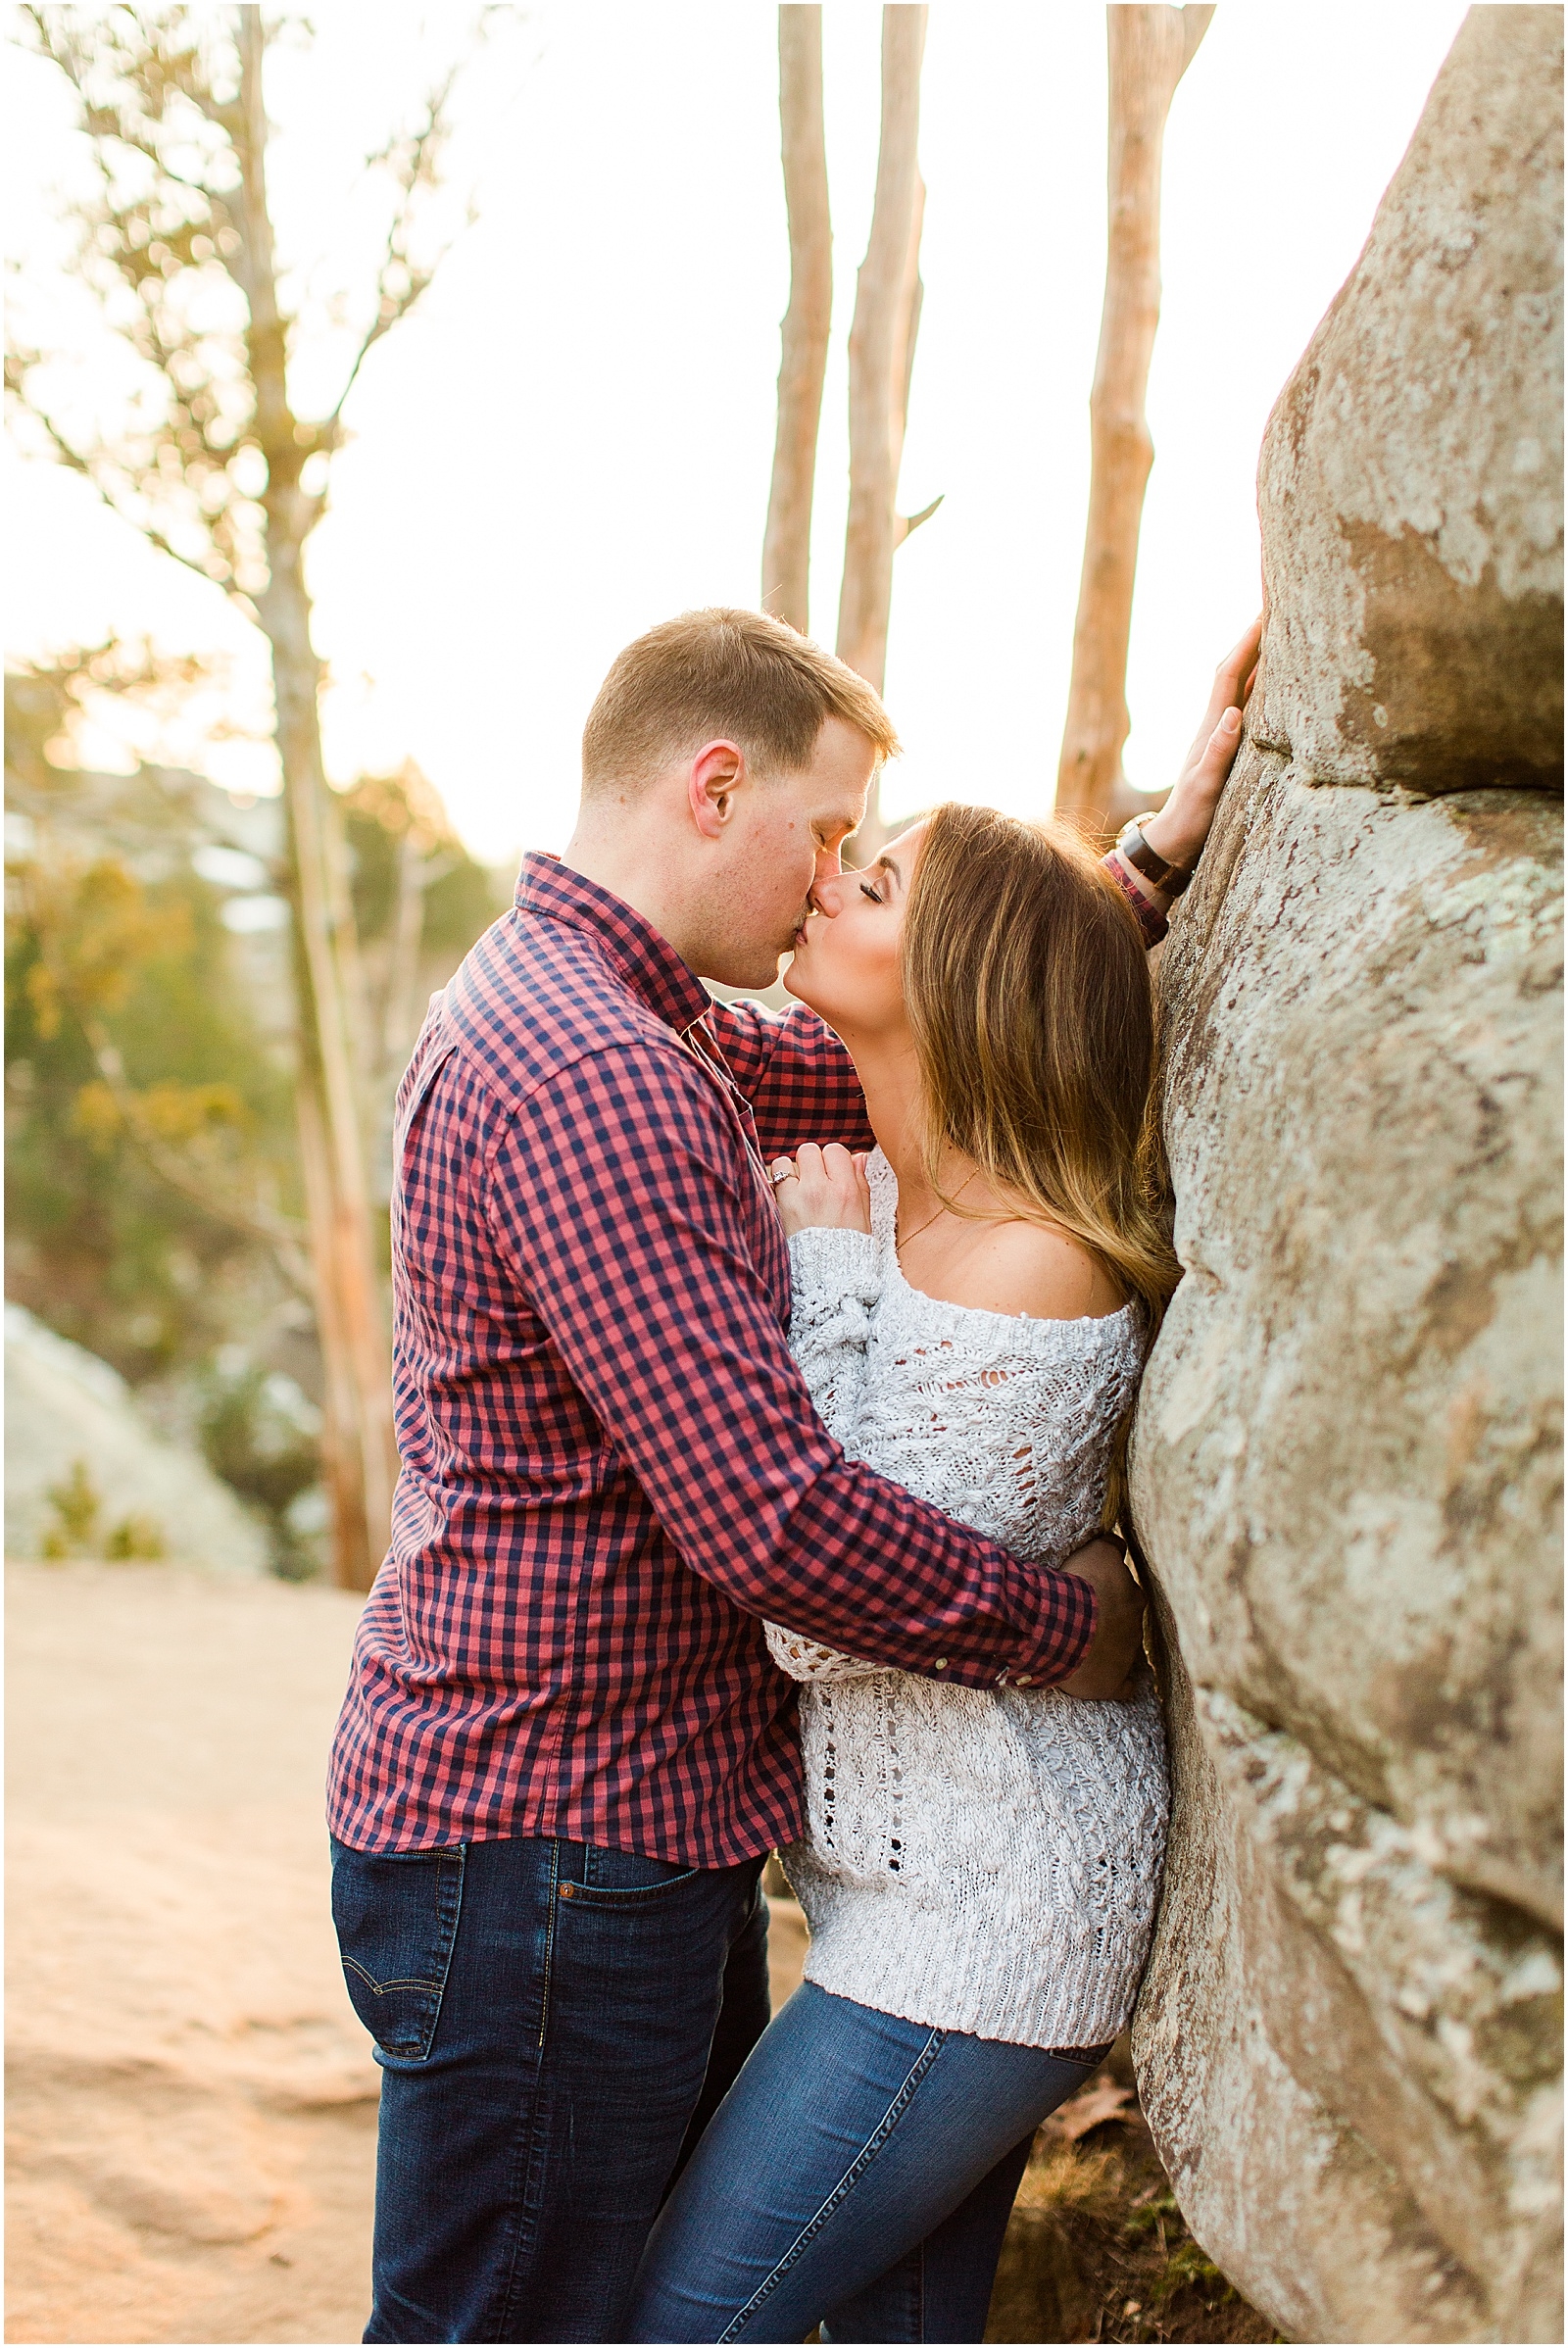 A Sunny Garden of the Gods Engagement Session | Shiloh and Lee | Bret and Brandie Photography068.jpg